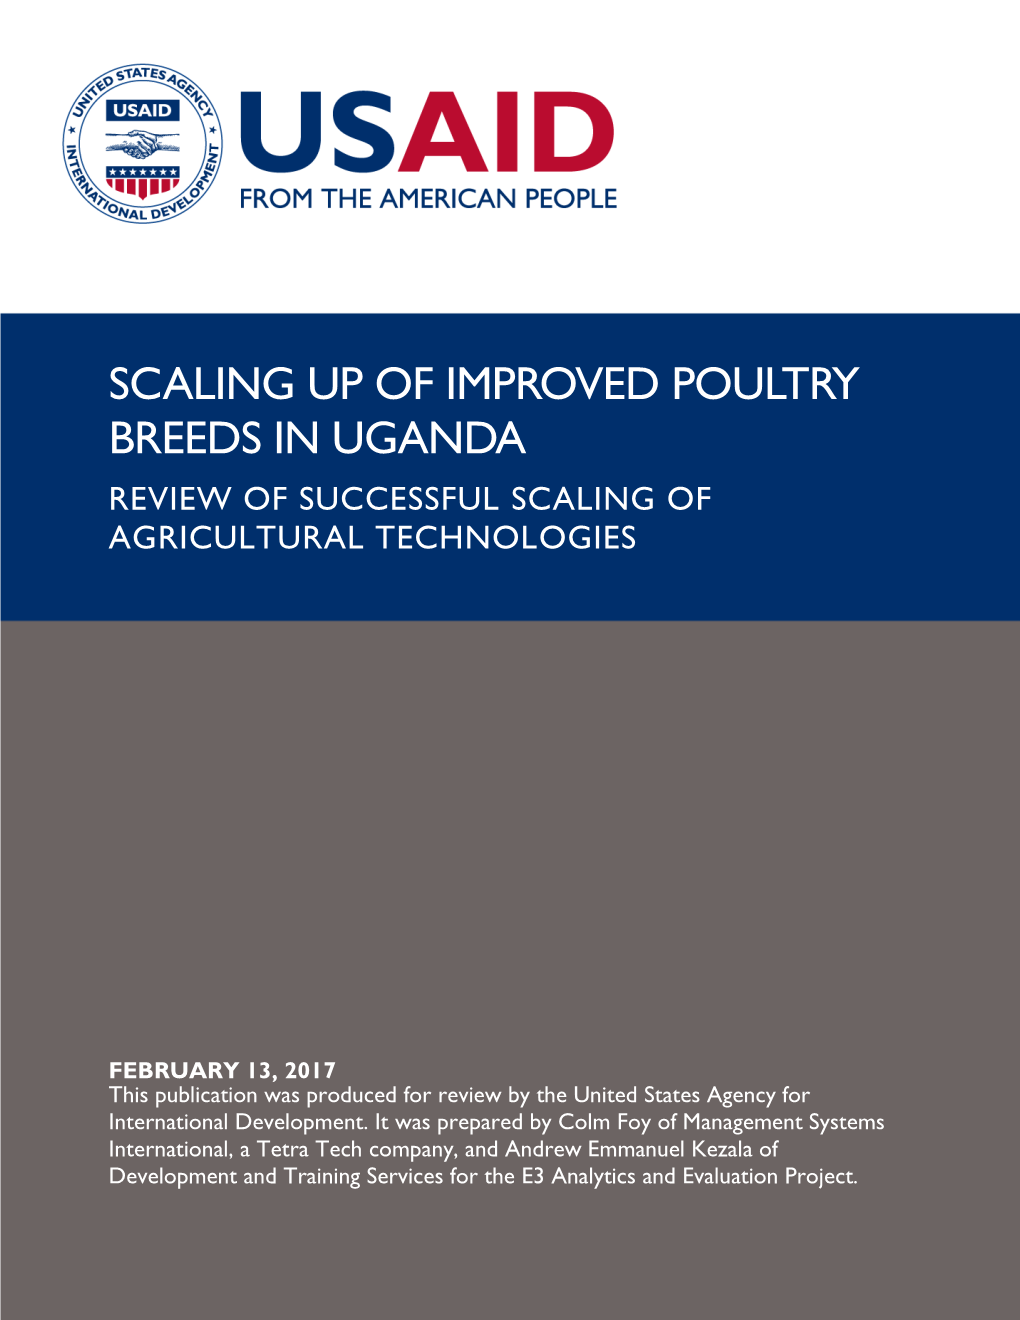 Scaling up of Improved Poultry Breeds in Uganda Review of Successful Scaling of Agricultural Technologies